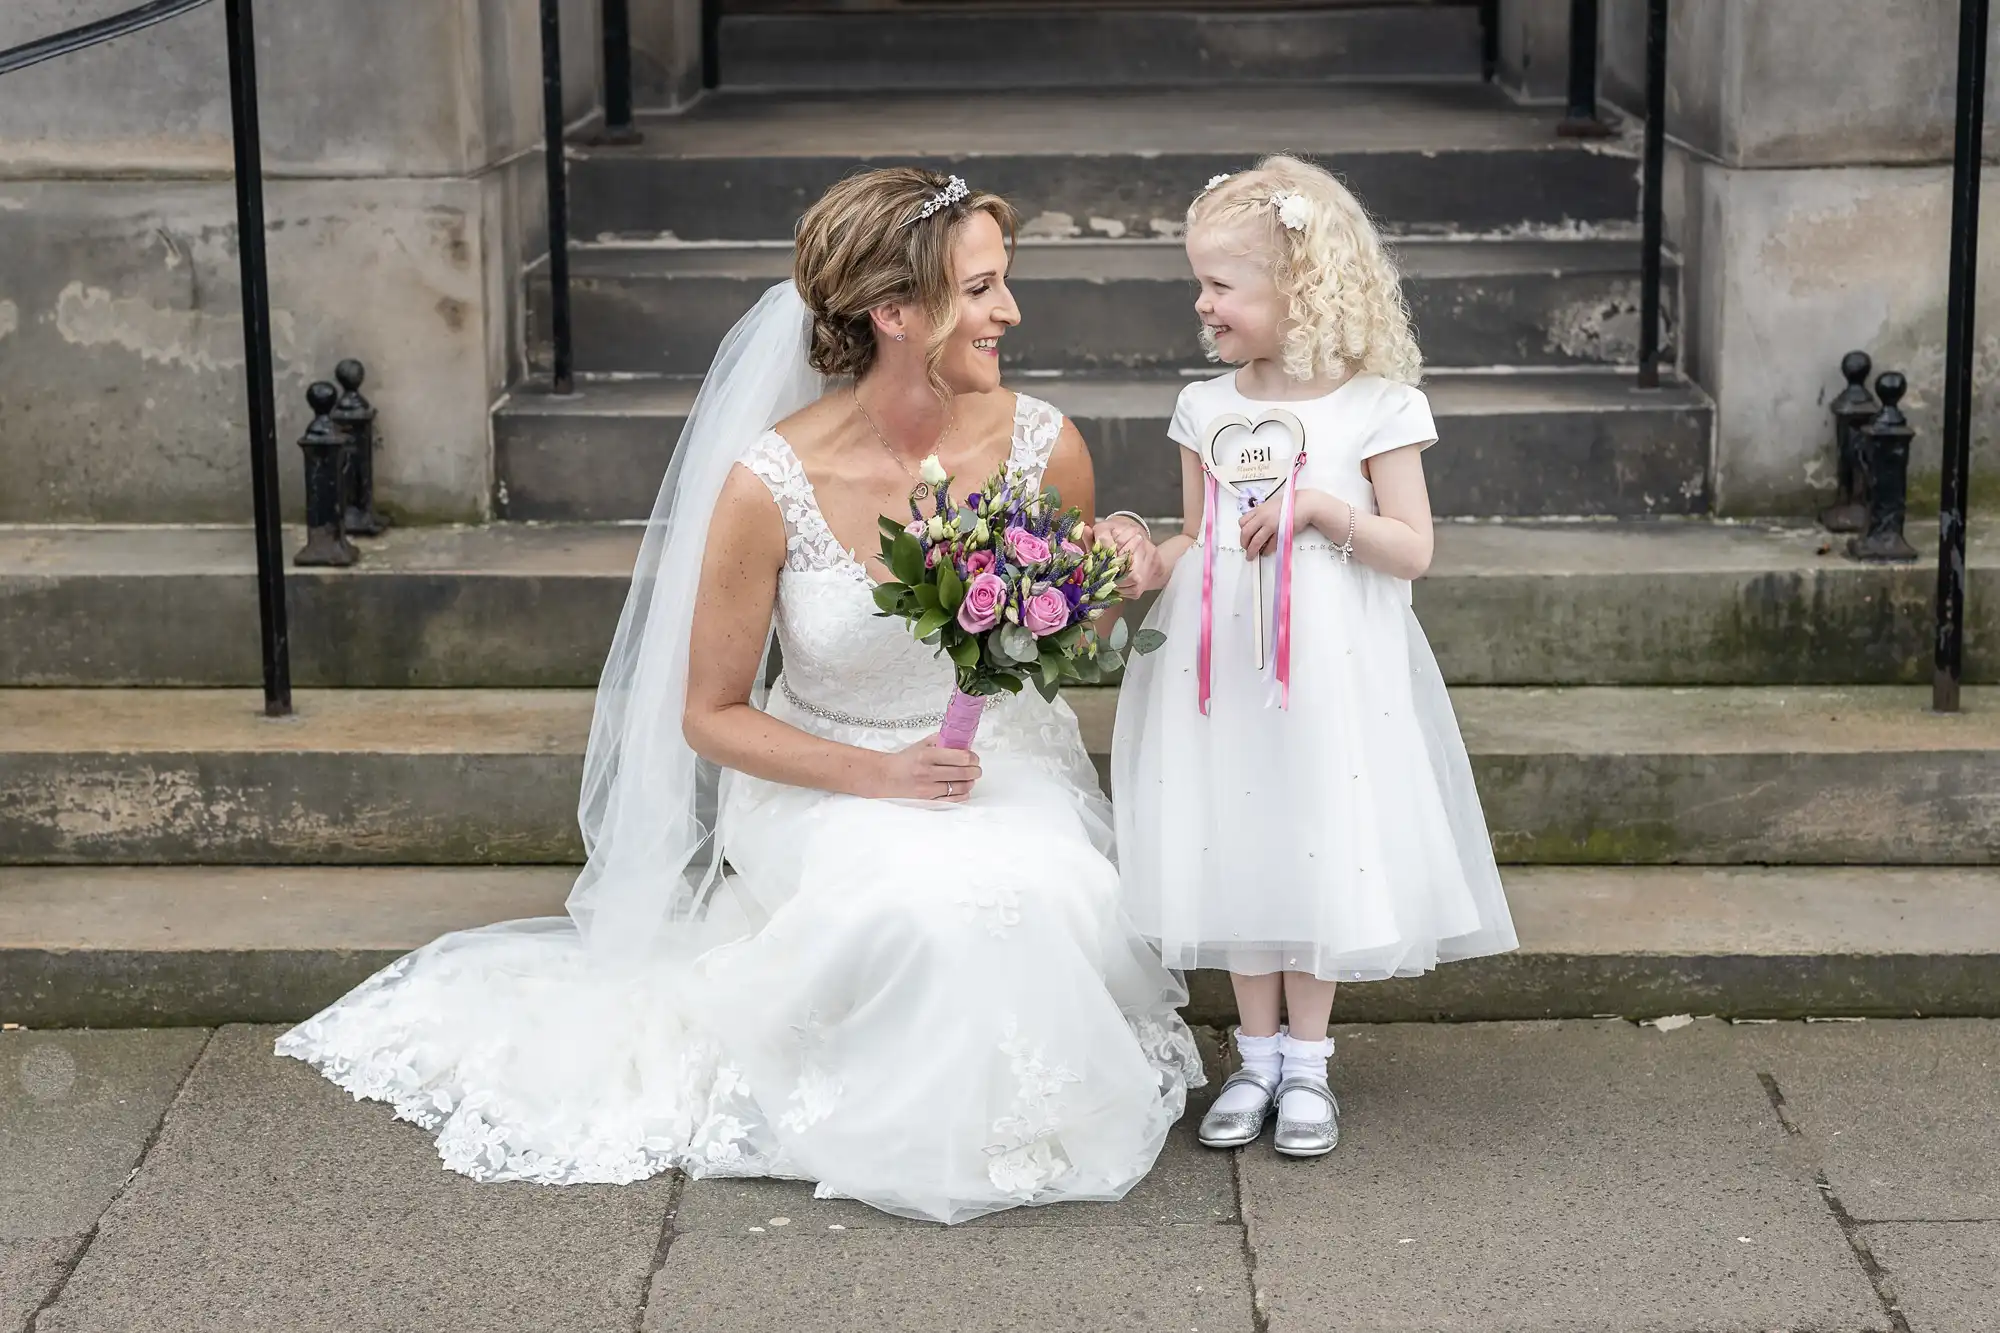 A bride in a white wedding dress sits on stone steps holding a bouquet while smiling at a young girl in a white dress holding a "2017" sign.